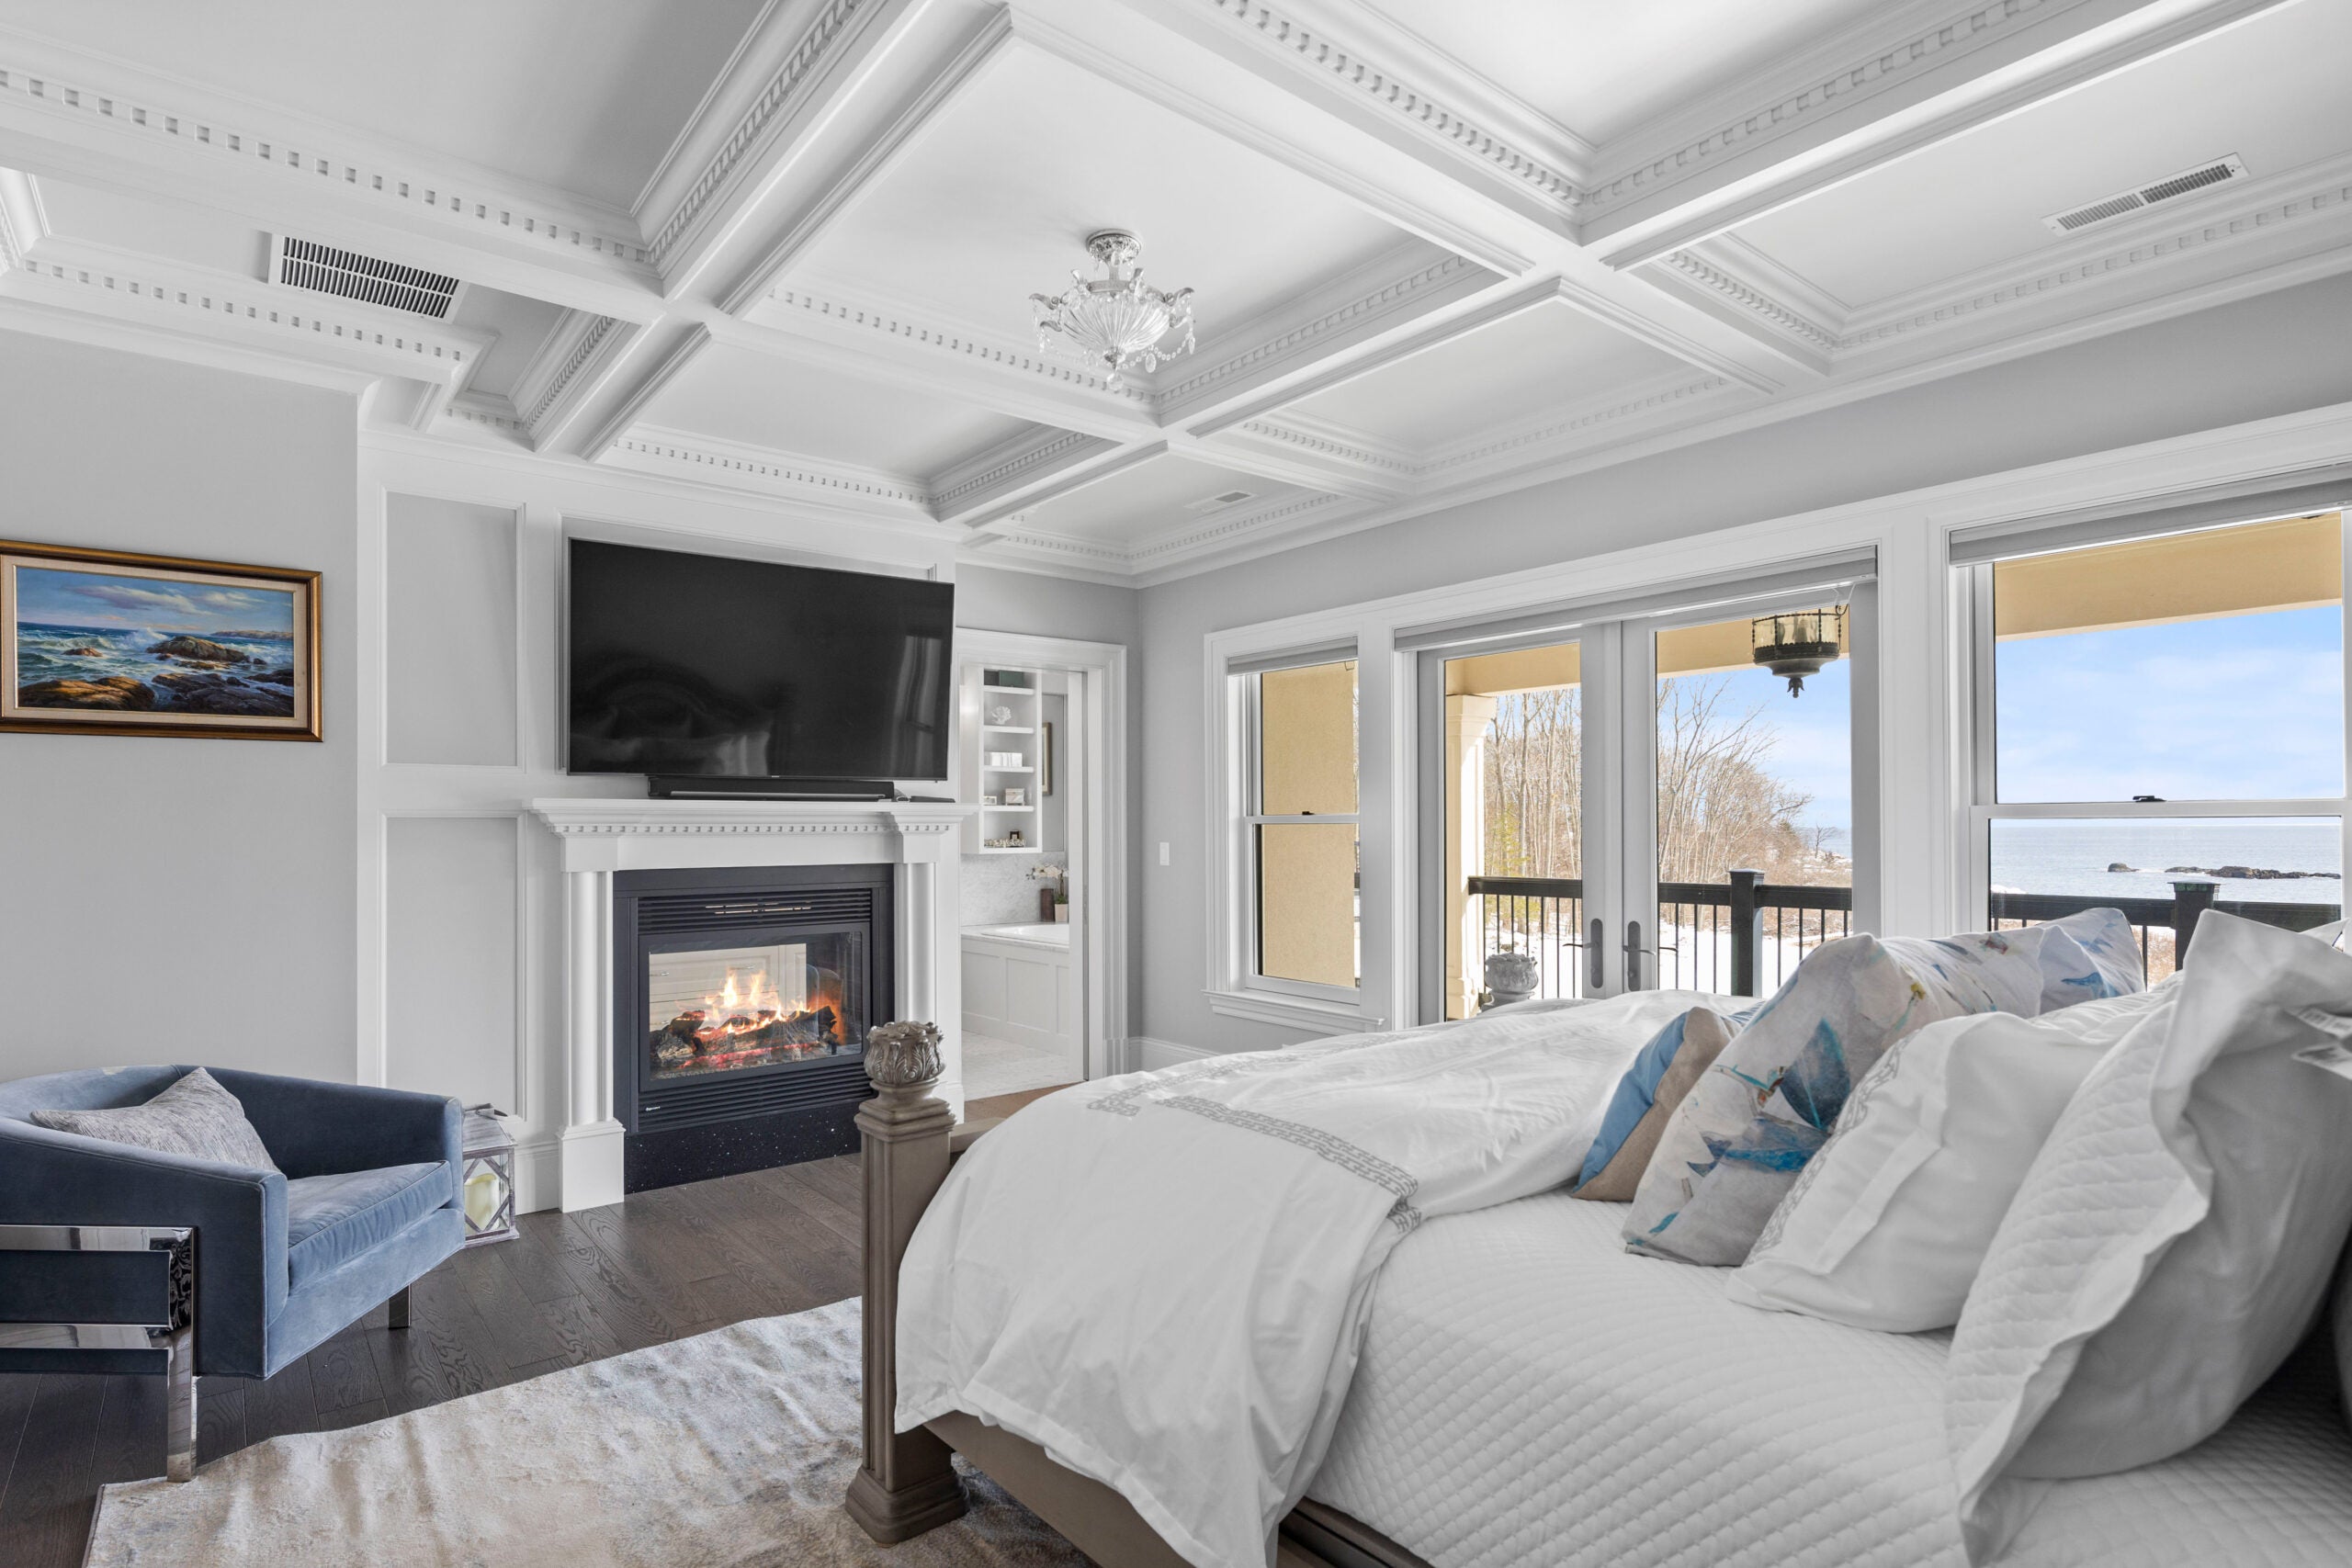 The primary bedroom includes coffered ceilings and a gas fireplace, as well as a sliding glass door that leads to a private deck.